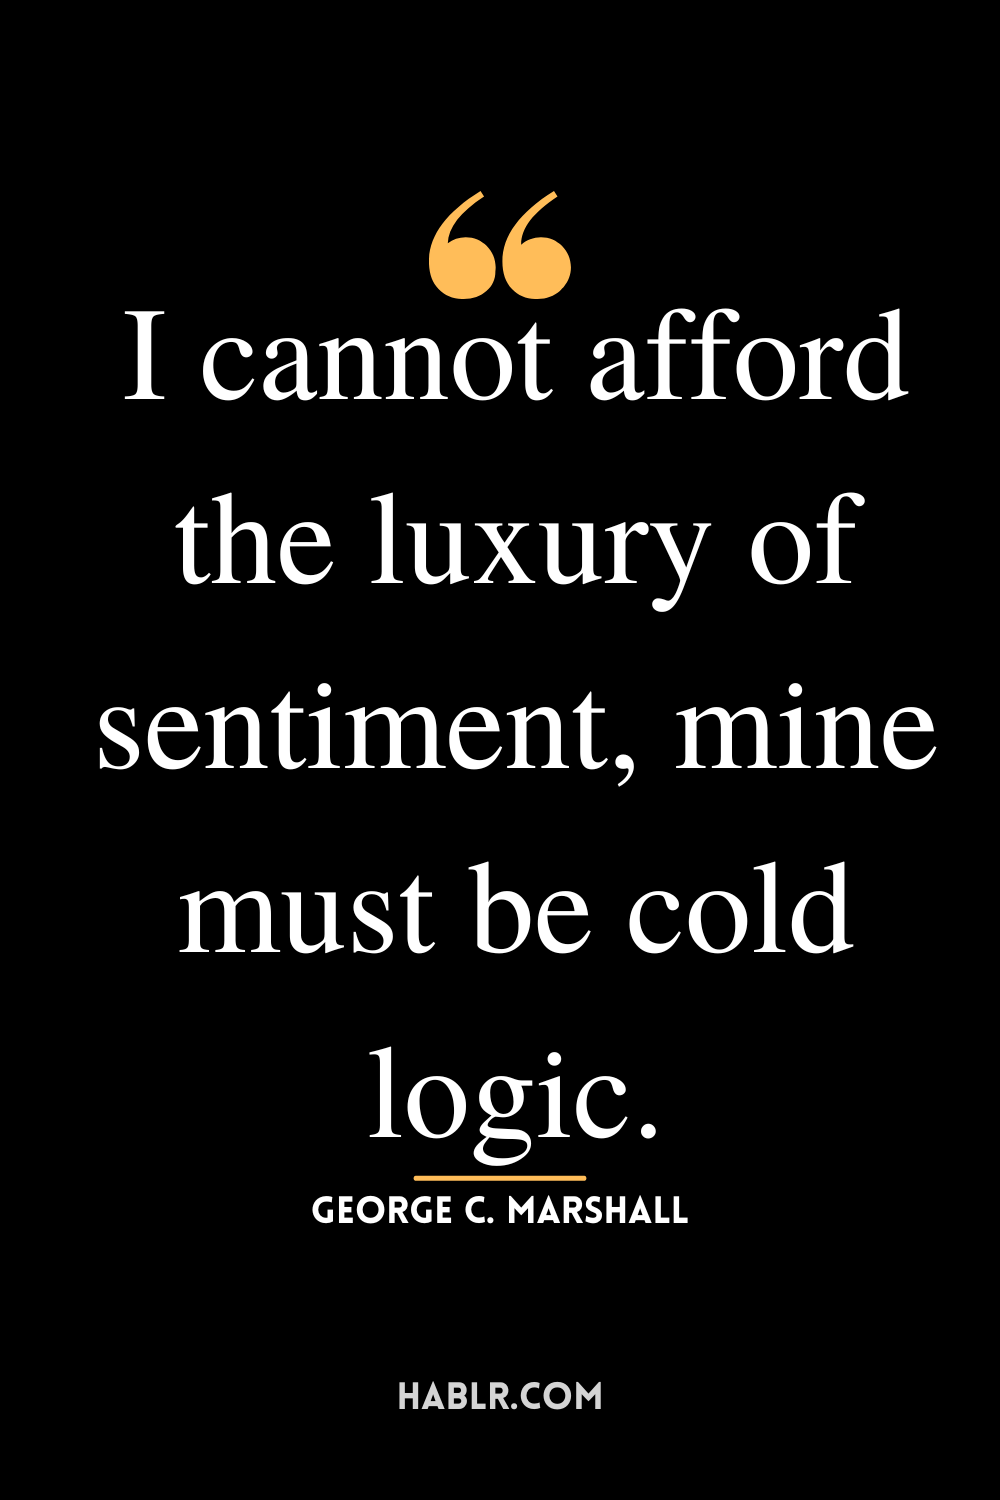 “I cannot afford the luxury of sentiment, mine must be cold logic.” -George C. Marshall